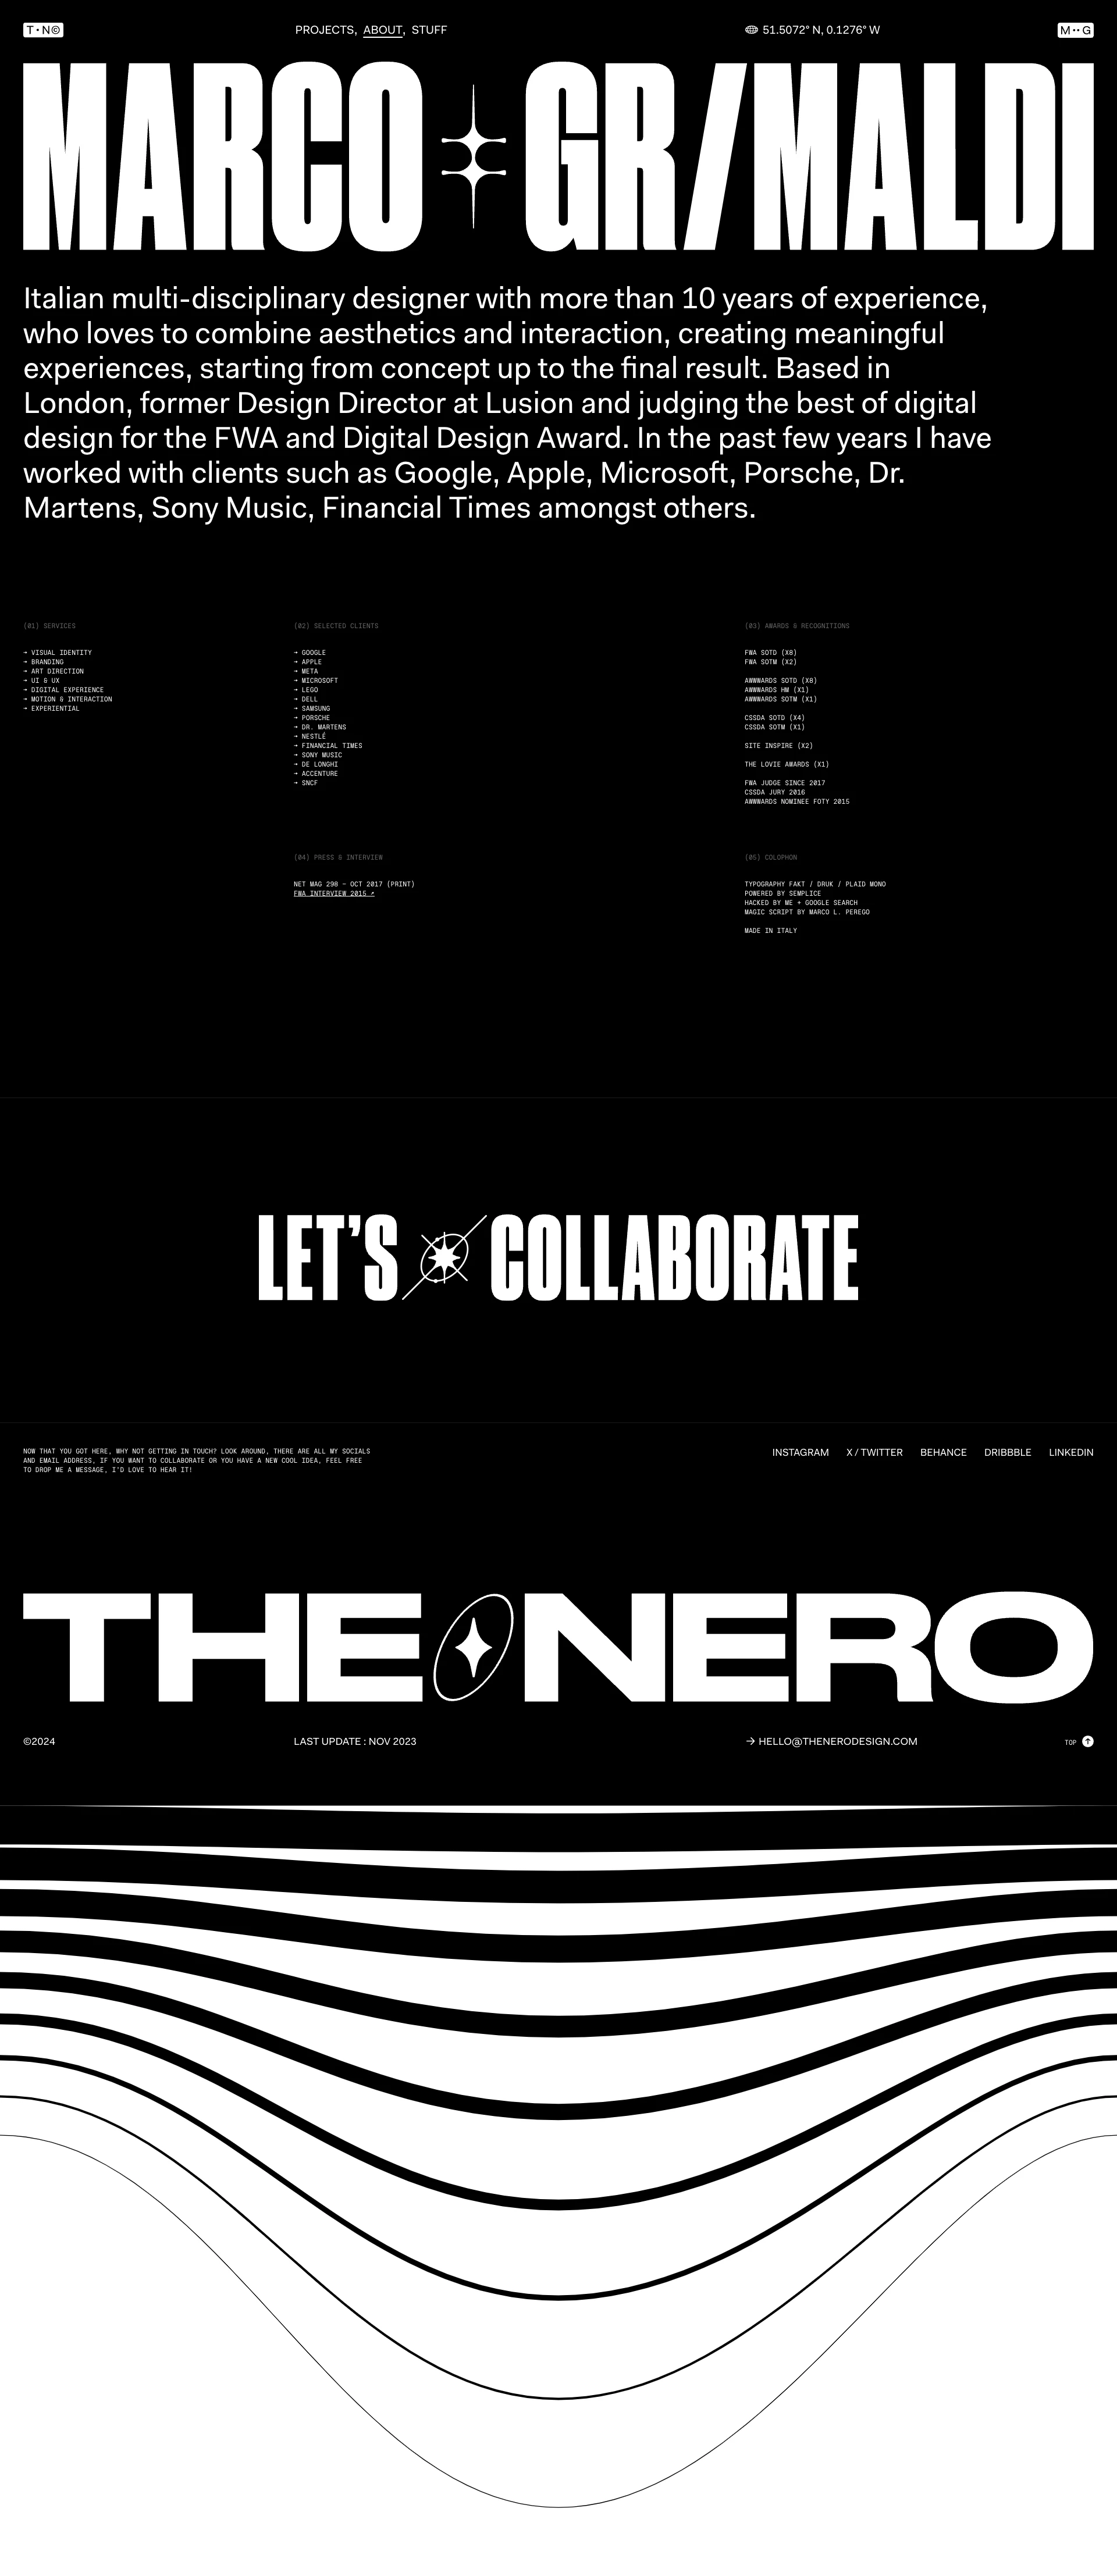 Marco Grimaldi Landing Page Example: Marco Grimaldi is a multi-disciplinary designer and director with a background in traditional graphic design and development. His work primarily focuses on digital design, immersive experience and identity design.